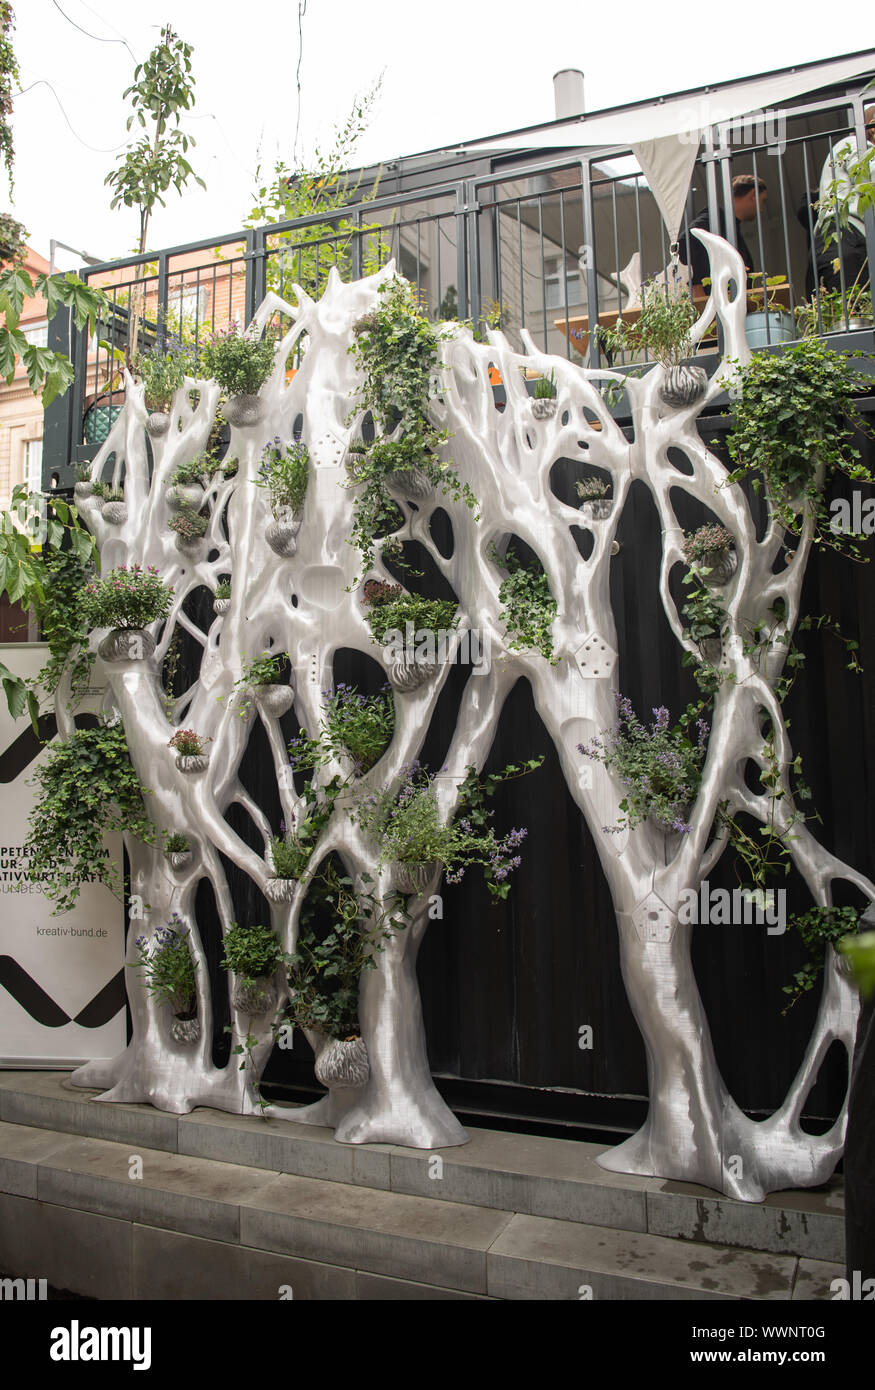 Berlin, Germany. 16th Sep, 2019. A new type of façade cladding was mounted on a wall in the inner courtyard of the Federal Centre of Competence for Culture and Creative Industries. BigRep, leading manufacturer of 3D printers, presented the world's first fully 3D printed environmental habitat for green plants and insects. It was made entirely from recycled plastic materials from PET bottles. Credit: Tom Weller/dpa/Alamy Live News Stock Photo